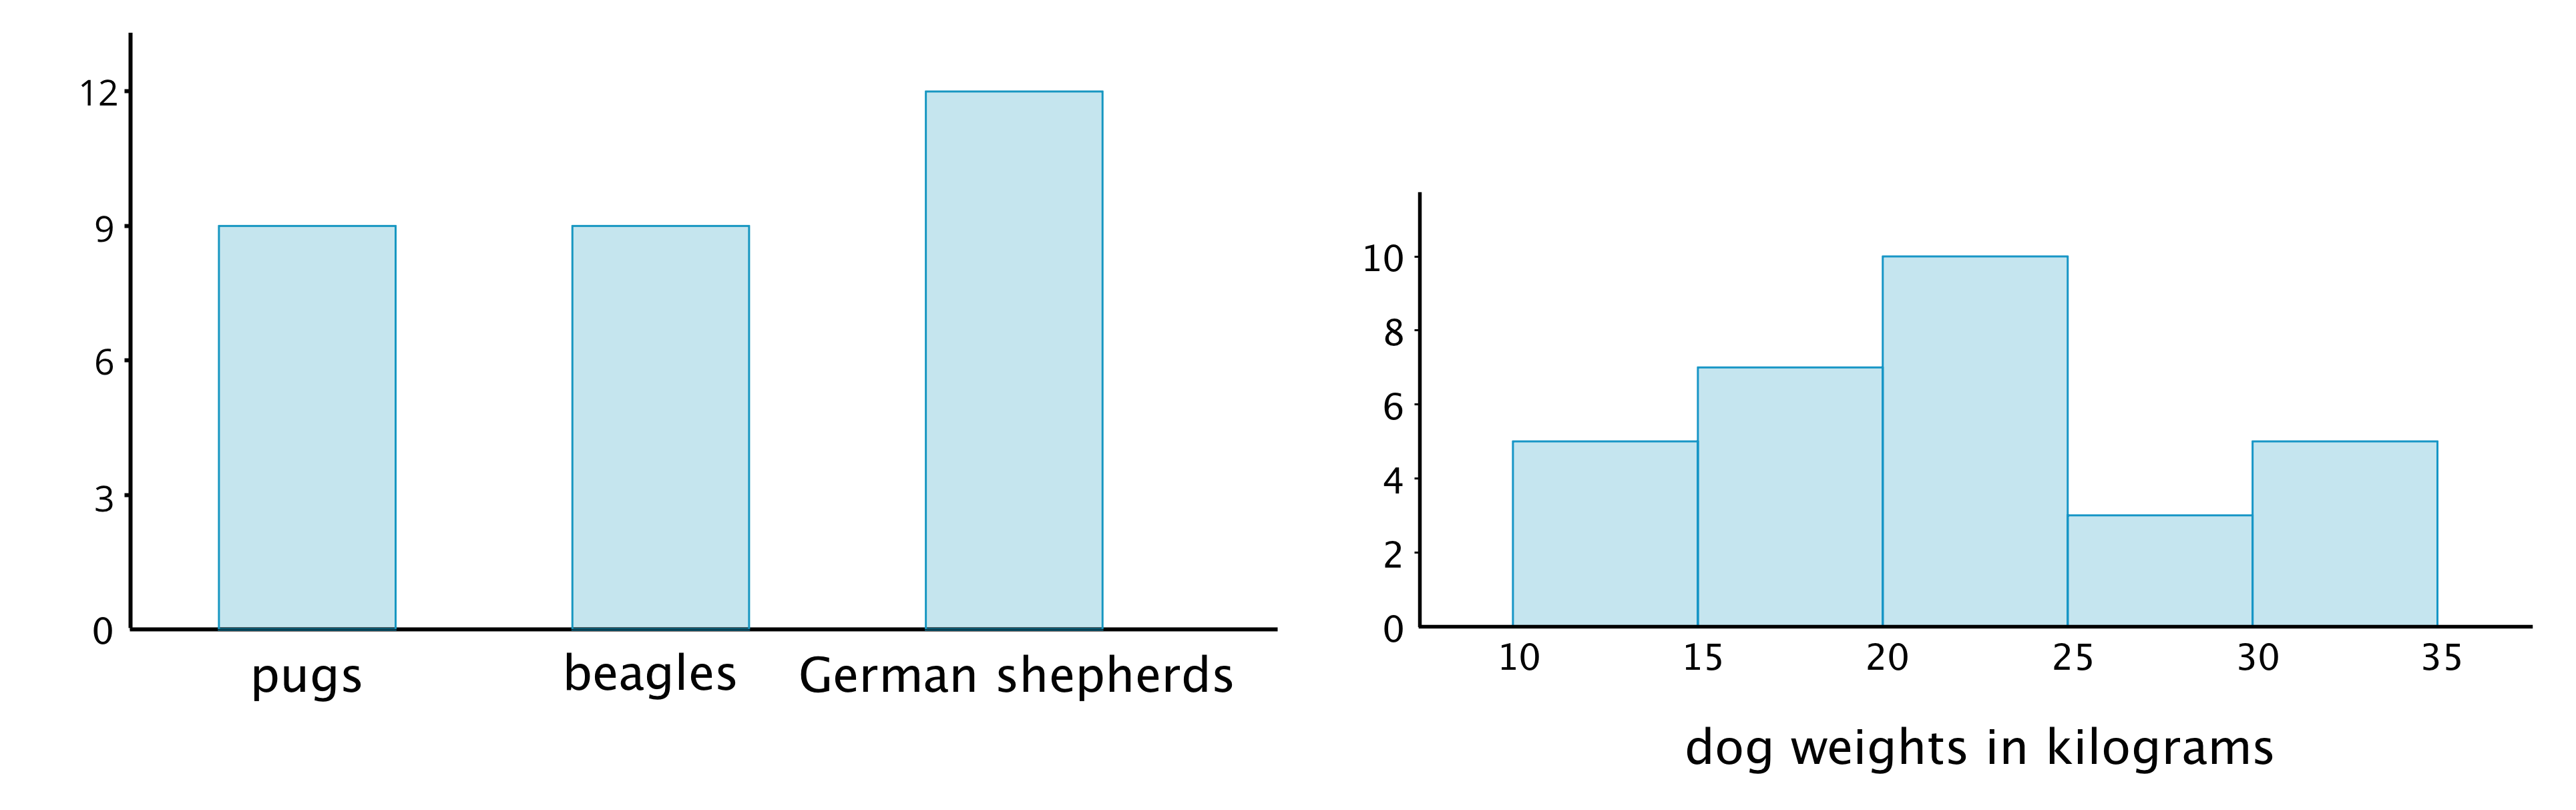 A bar graph and a histogram. The bar graph has three categories on the horizontal axis labeled "pugs," "beagles," and "German shepherds." The vertical axis has the numbers 0 through 12, in increments of 3, indicated. The bar labeled “pugs” has a height of 9. The bar labeled “beagles” has a height of 9” and the bar labeled “German shepherds” has a height of 12. The histogram has a horizontal axis labeled “dog weights in kilograms.” The vertical axis has the numbers 0 through 10, in increments of 2, indicated. The data represented by the bars are as follows: 10 up to 15 kilograms, 5; 15 up to 20 kilograms, 7; 20 up to 25 kilograms, 10; 25 up to 30 kilograms, 3; 30 up to 35 kilograms, 5.